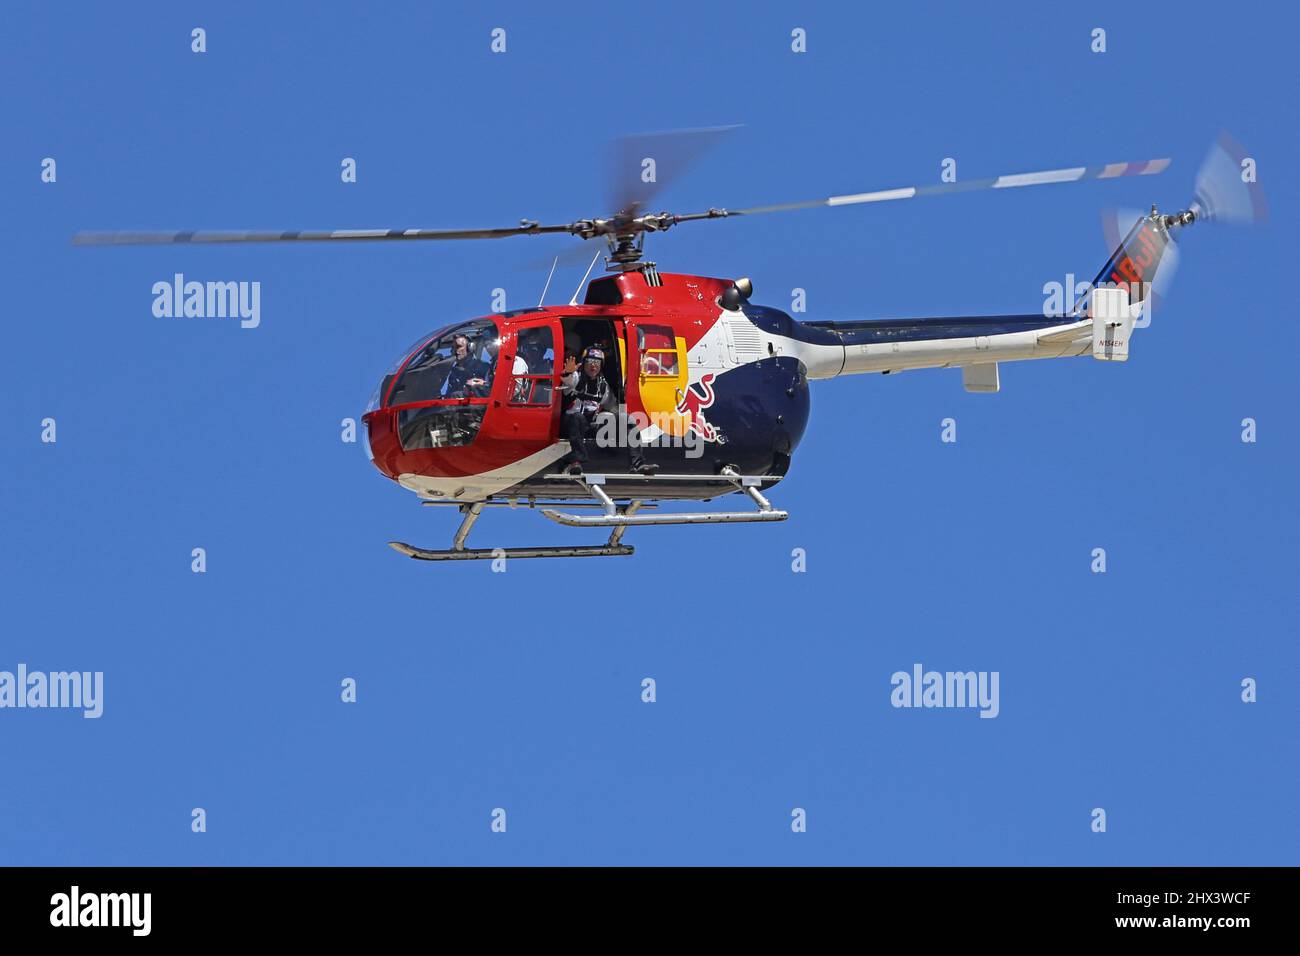 Lancaster, CA / USA - March 25, 2018: A modified Messerschmitt-Bolkow-Blohm Bo-105 CBS4 helicopter, operated by Red Bull, is shown during an air show. Stock Photo